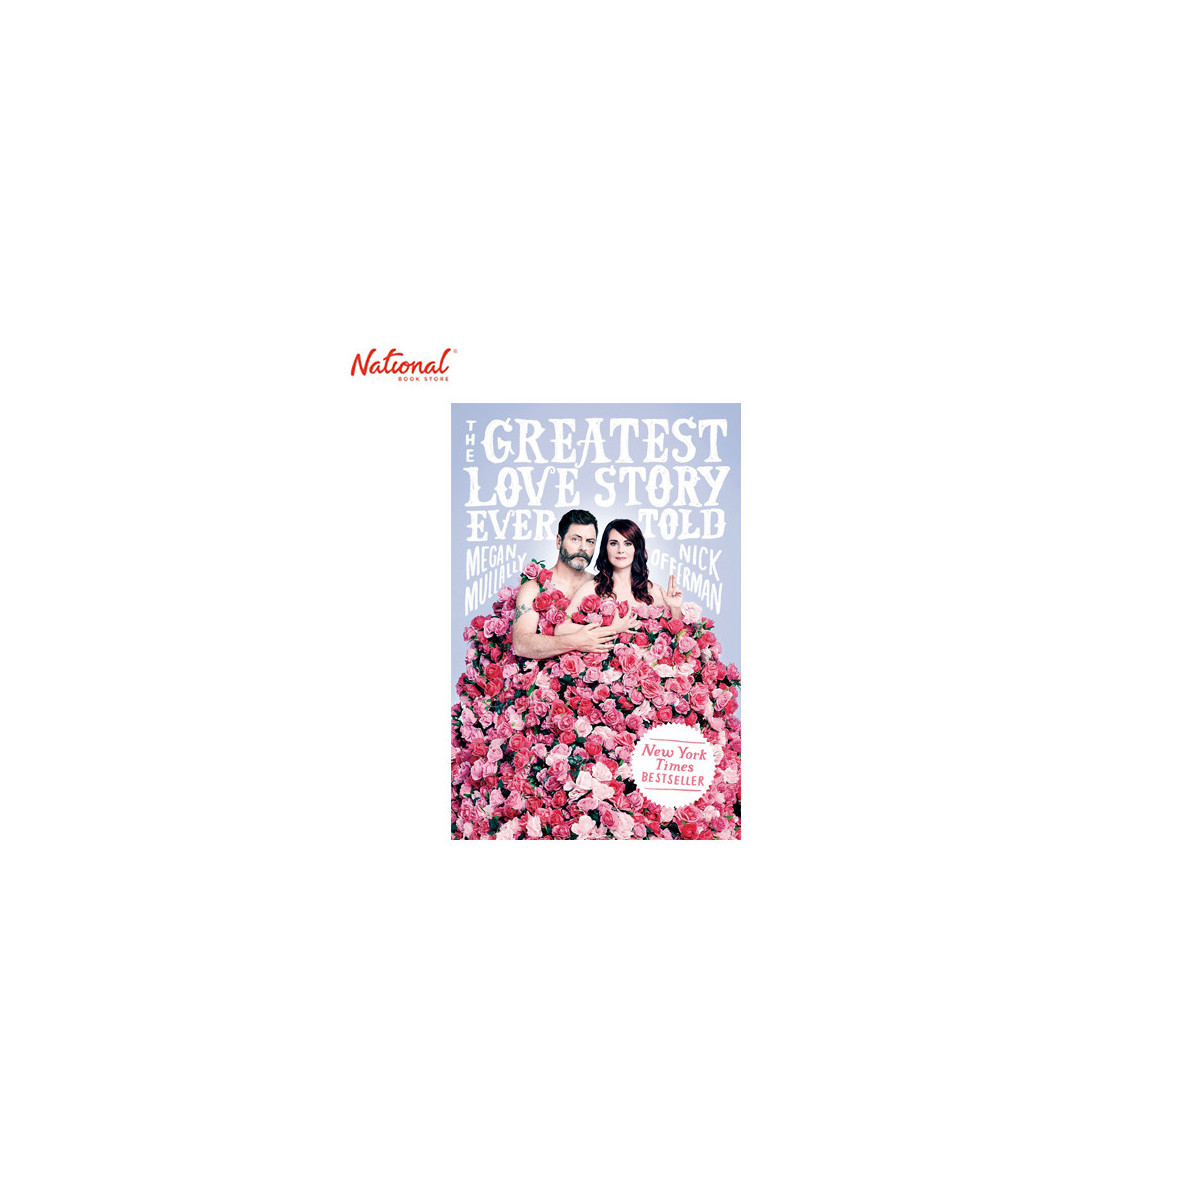 The Greatest Love Story Ever Told Hardcover by Megan Mullally